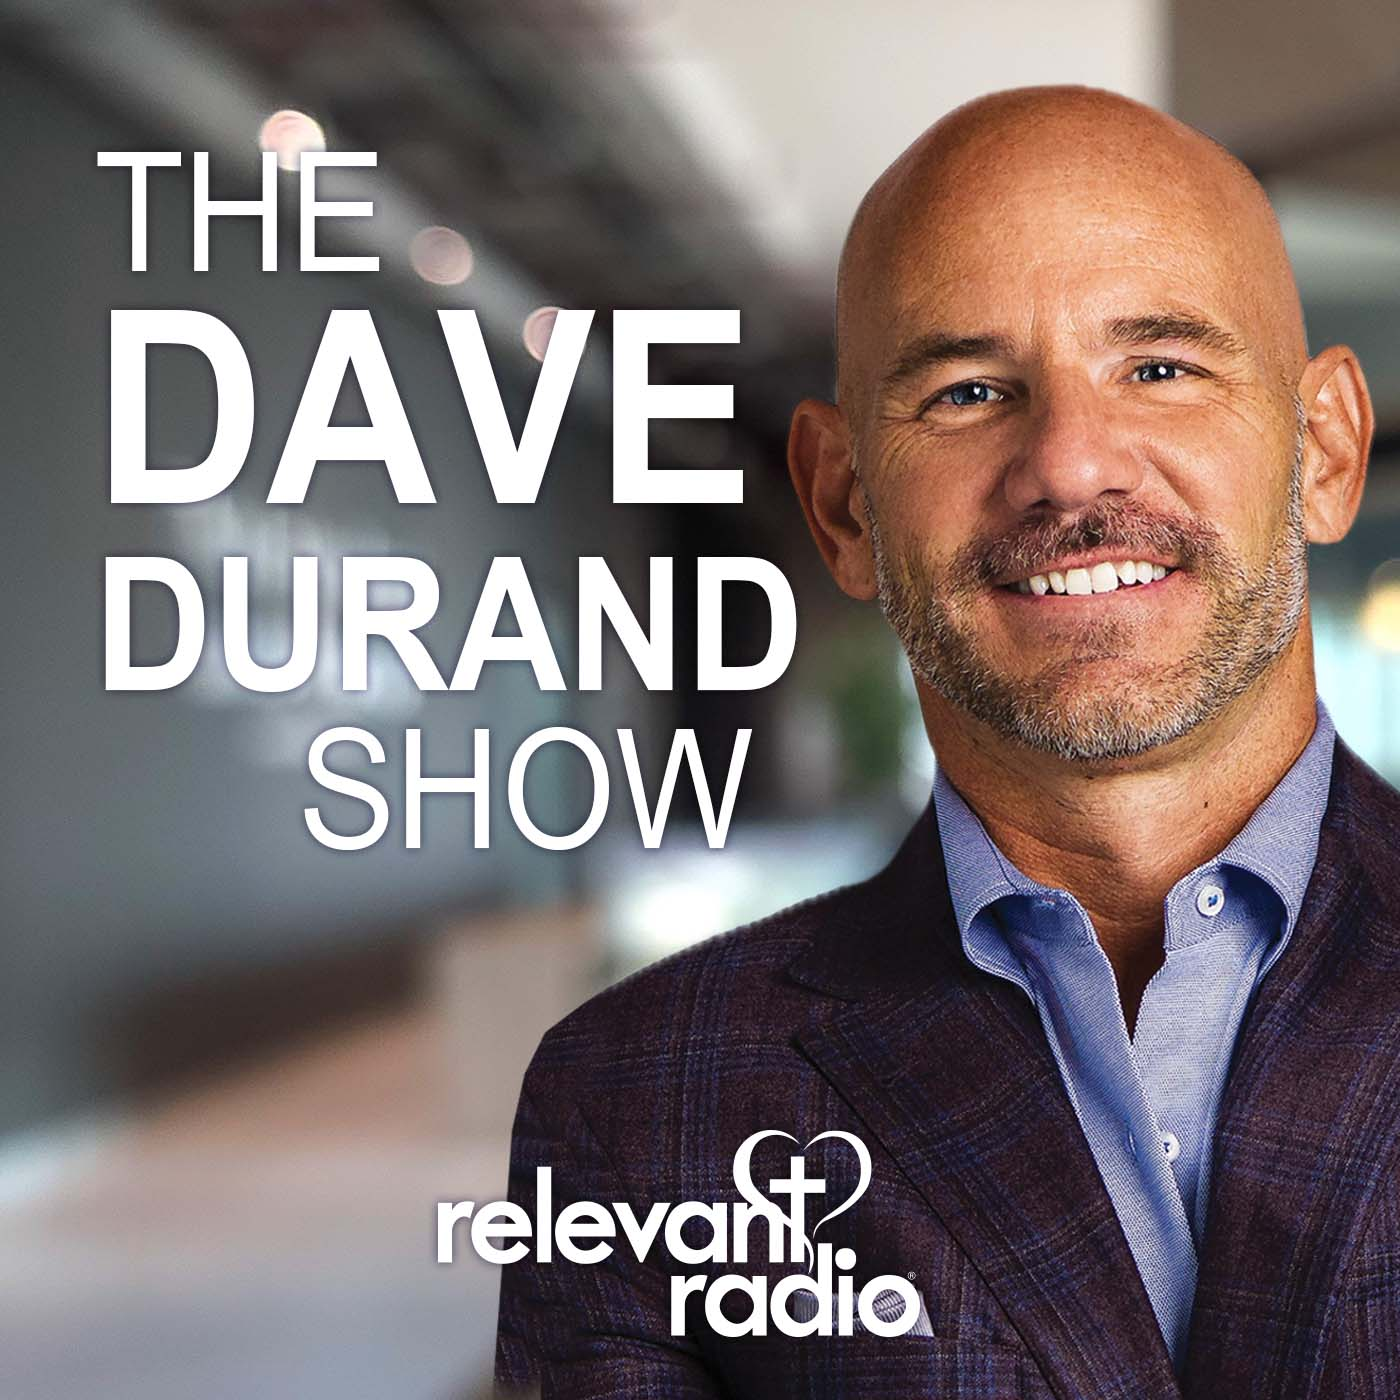 The Dave Durand Show